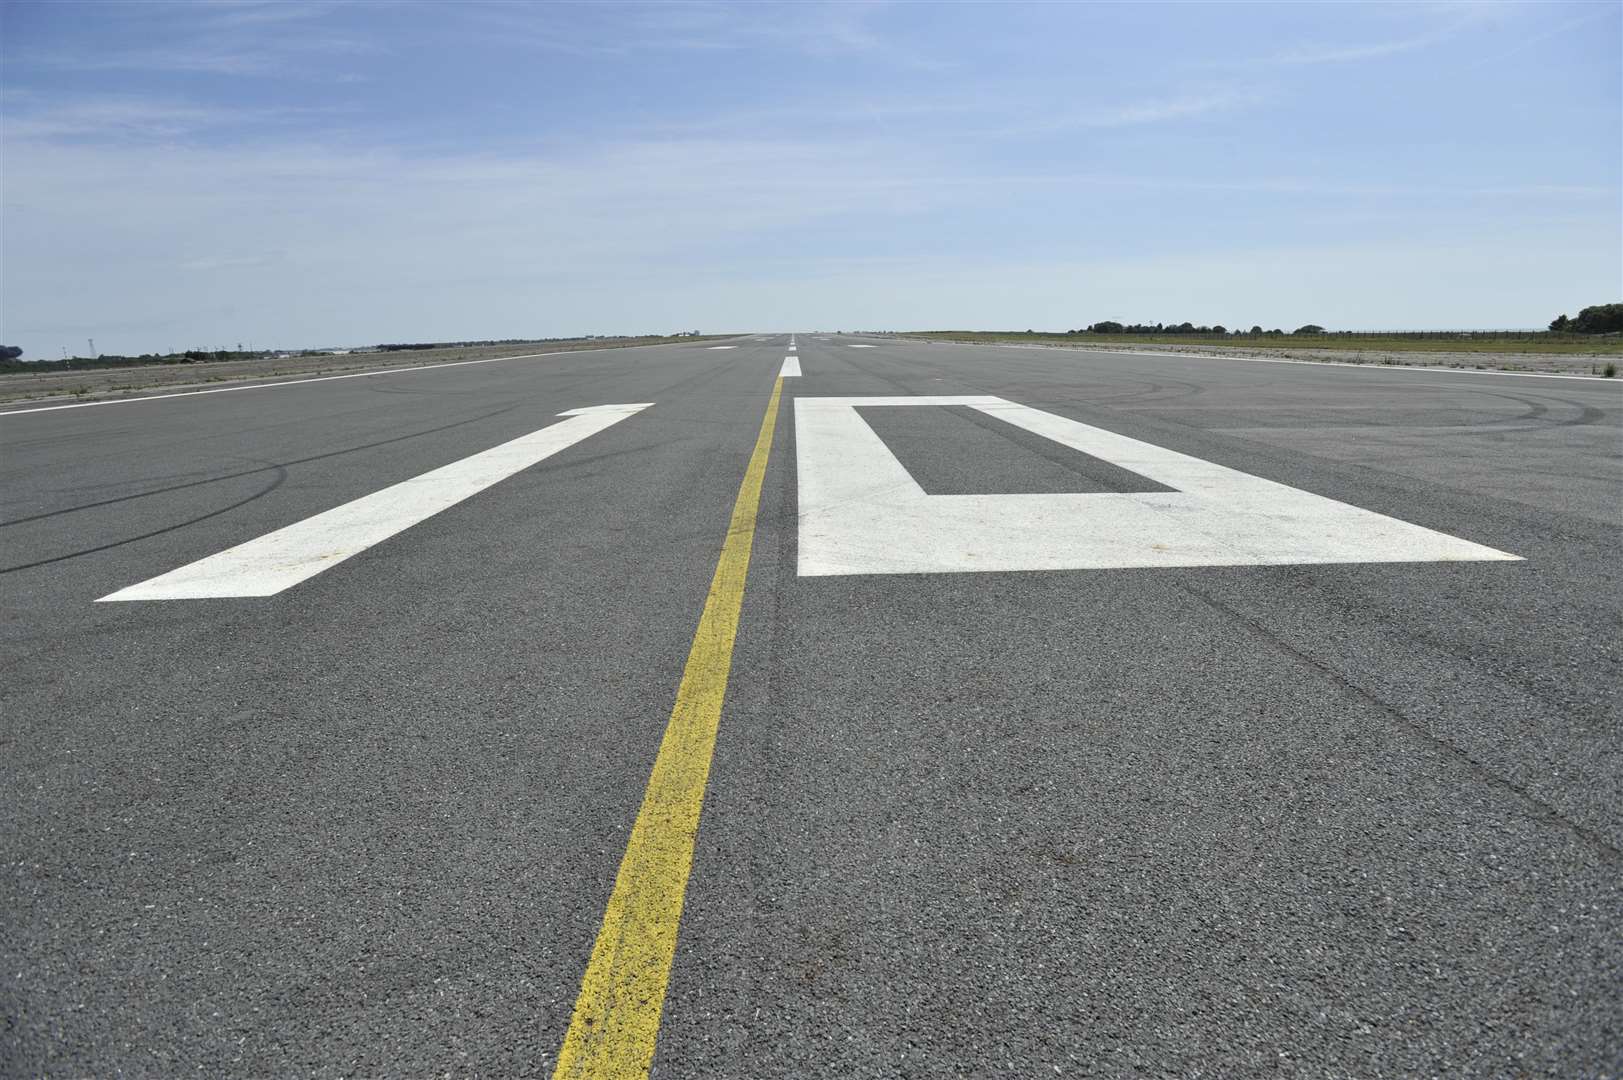 The former runway at Manston airport